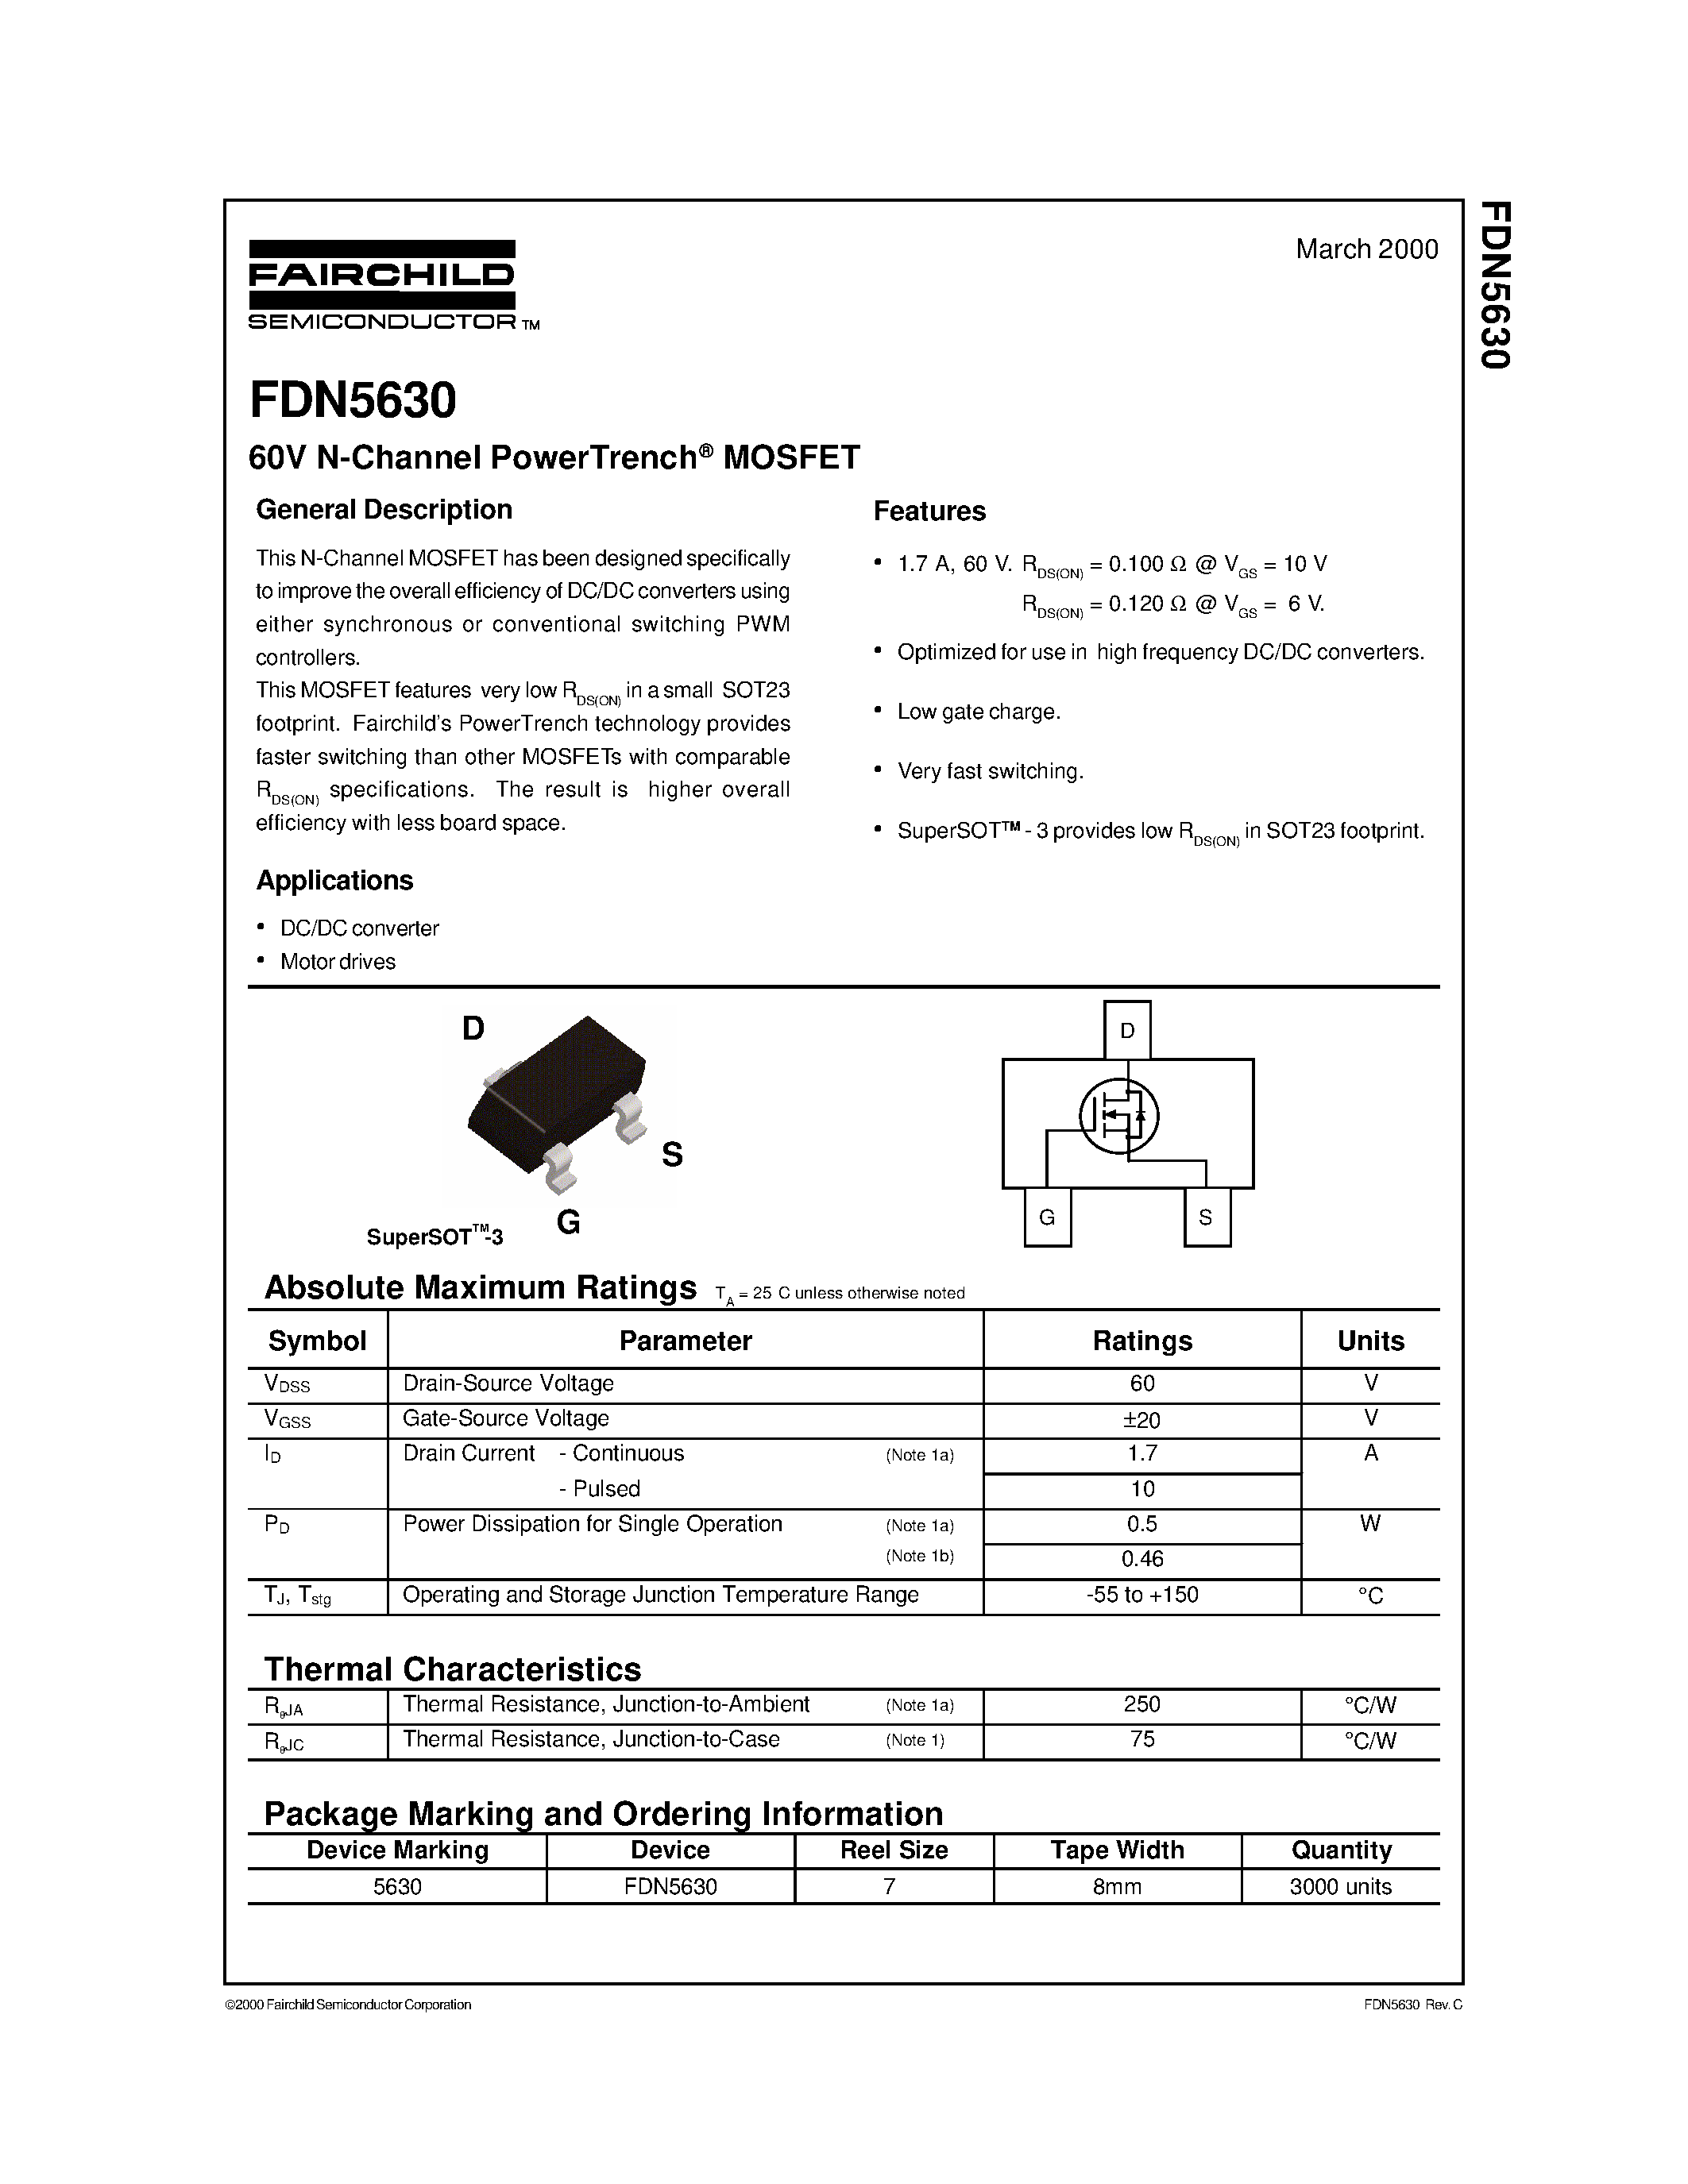 Даташит FDN5630 - 60V N-Channel PowerTrench MOSFET страница 1